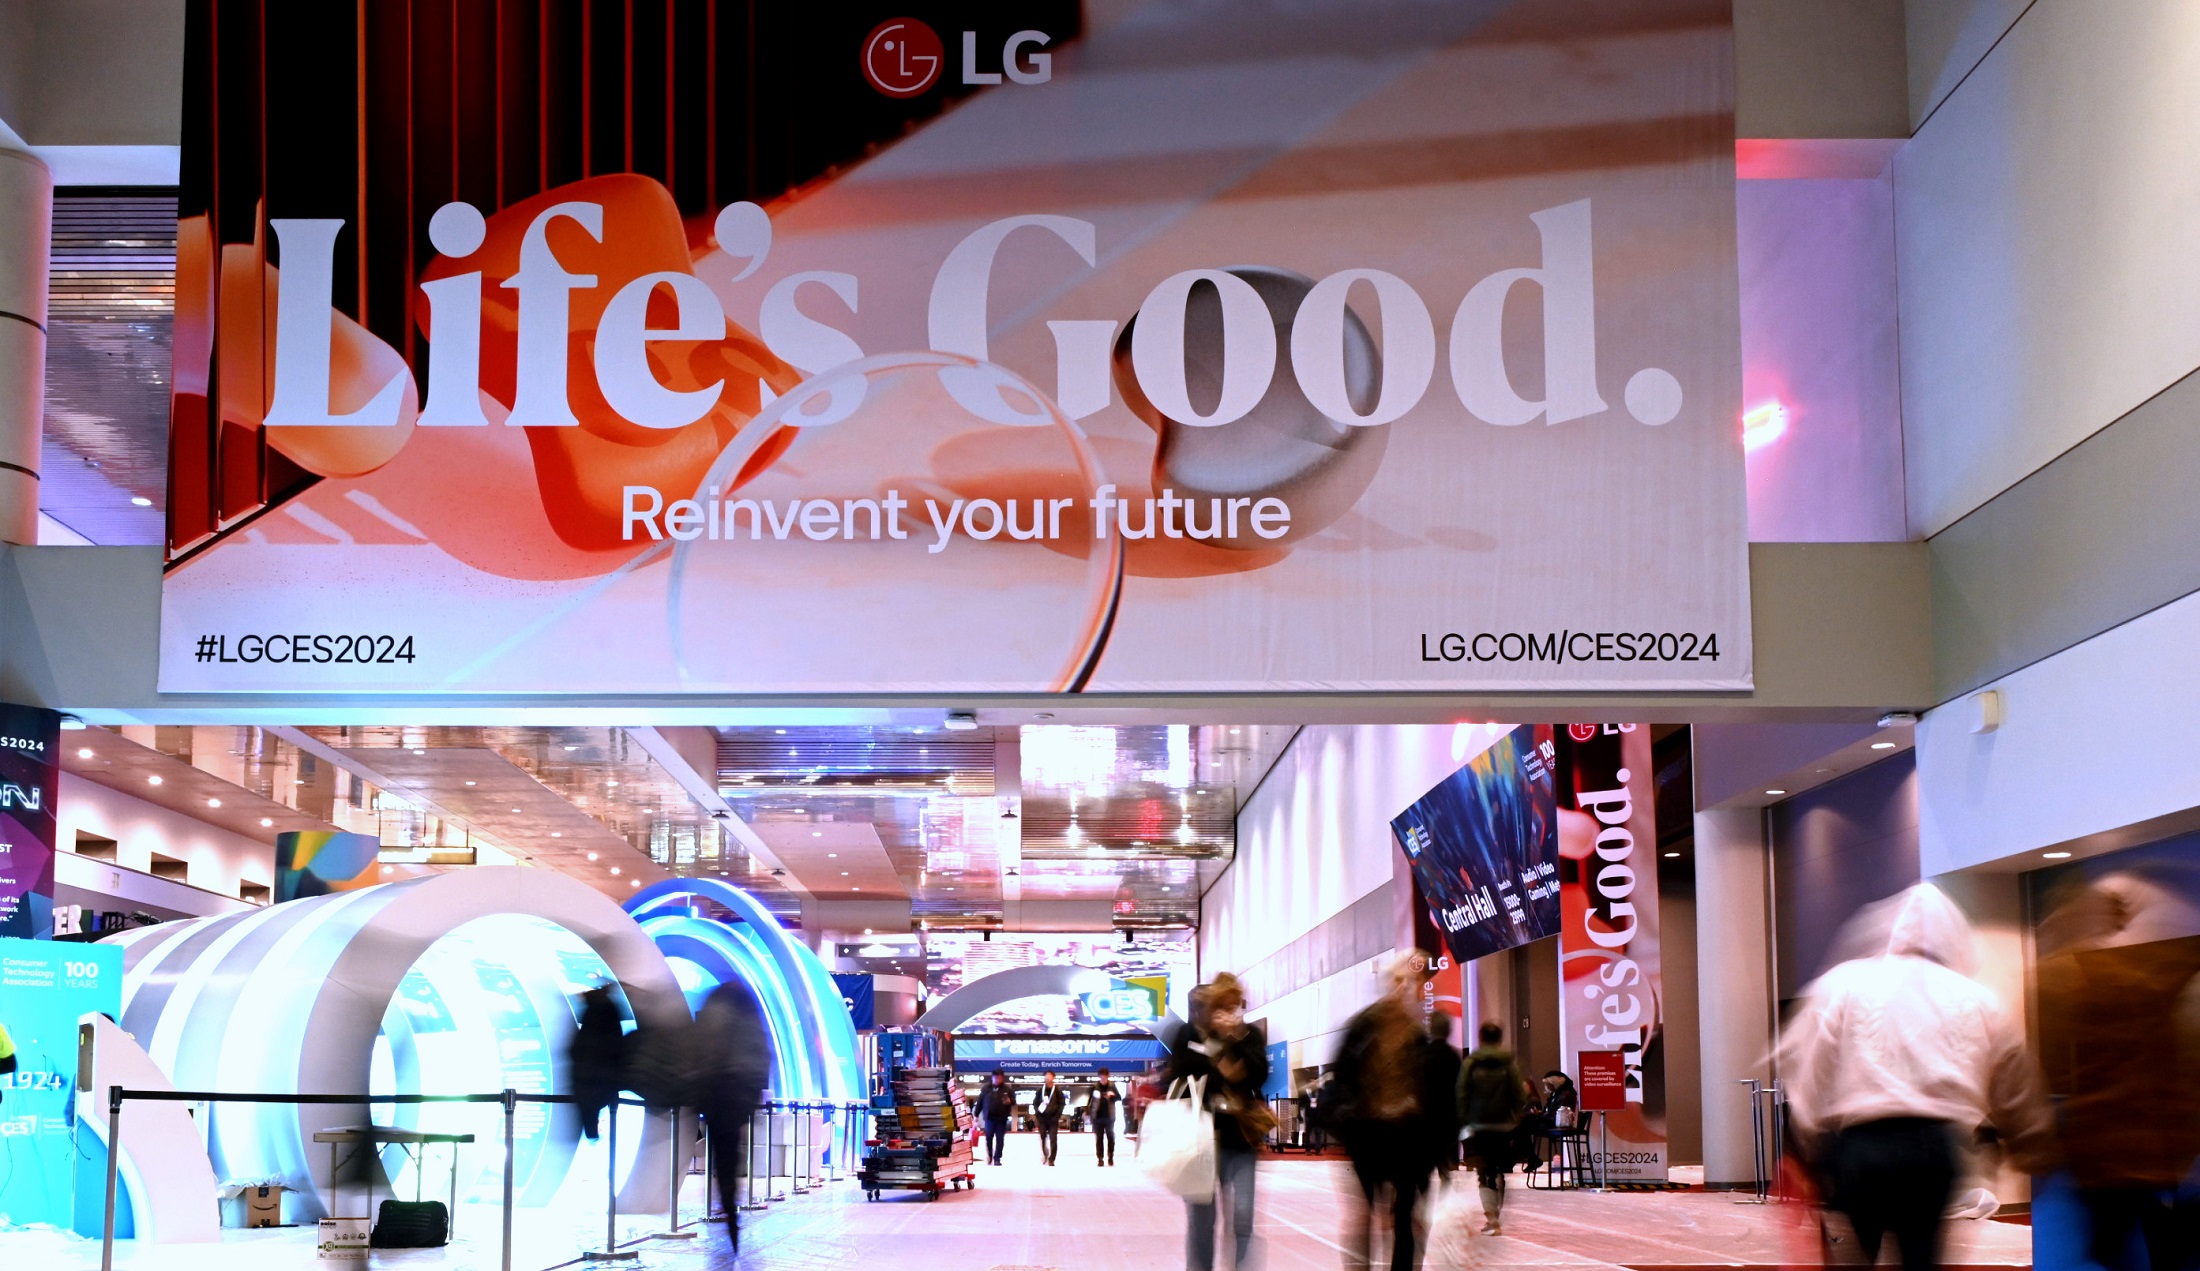 A photo of an LG sign at CES 2024